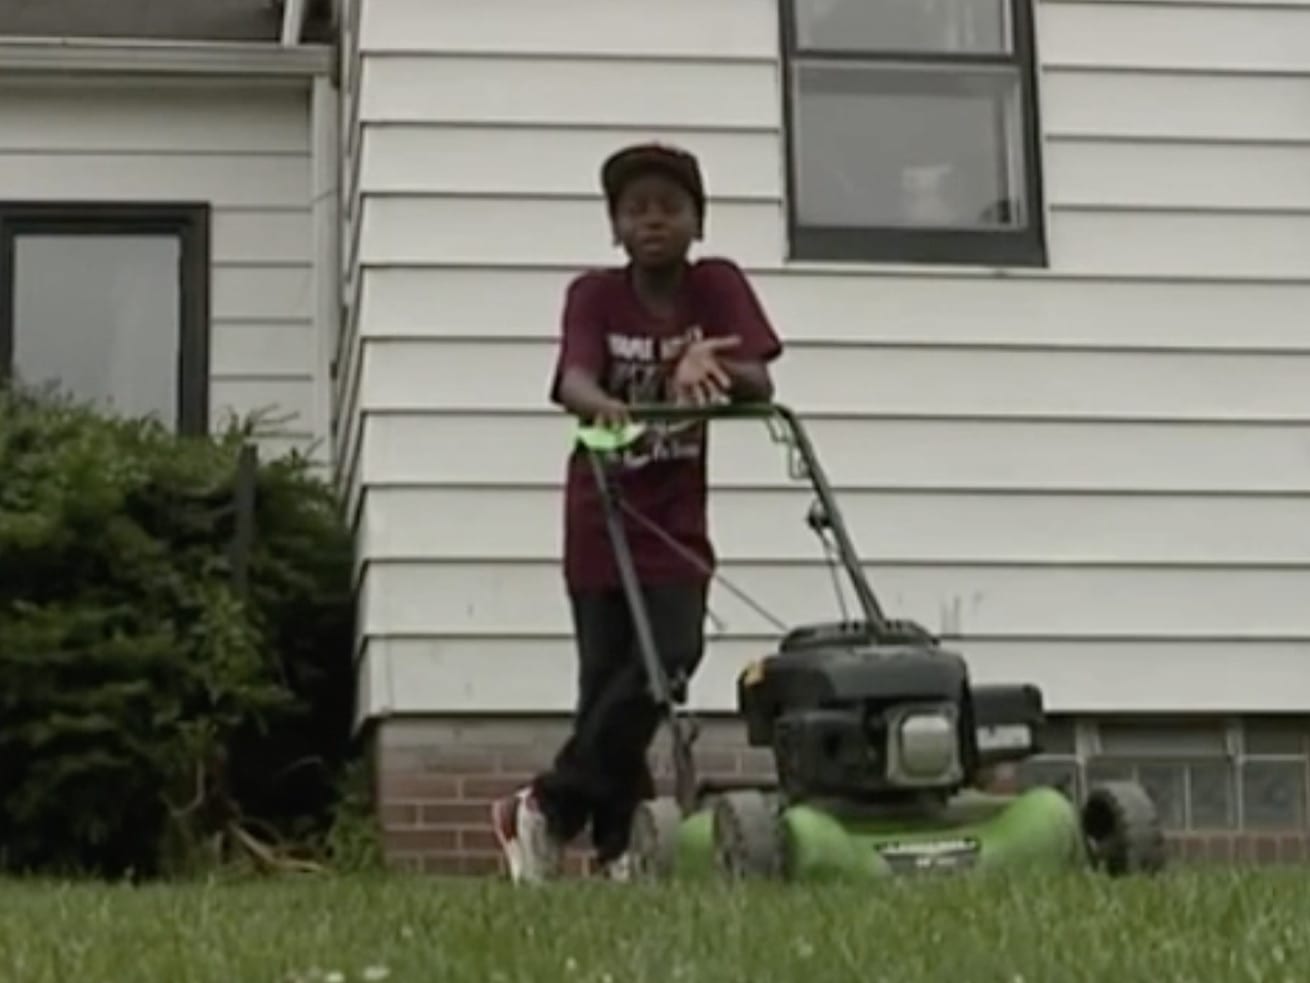 A white neighbor called police on a kid mowing a lawn. Later, they called as he played in a yard.